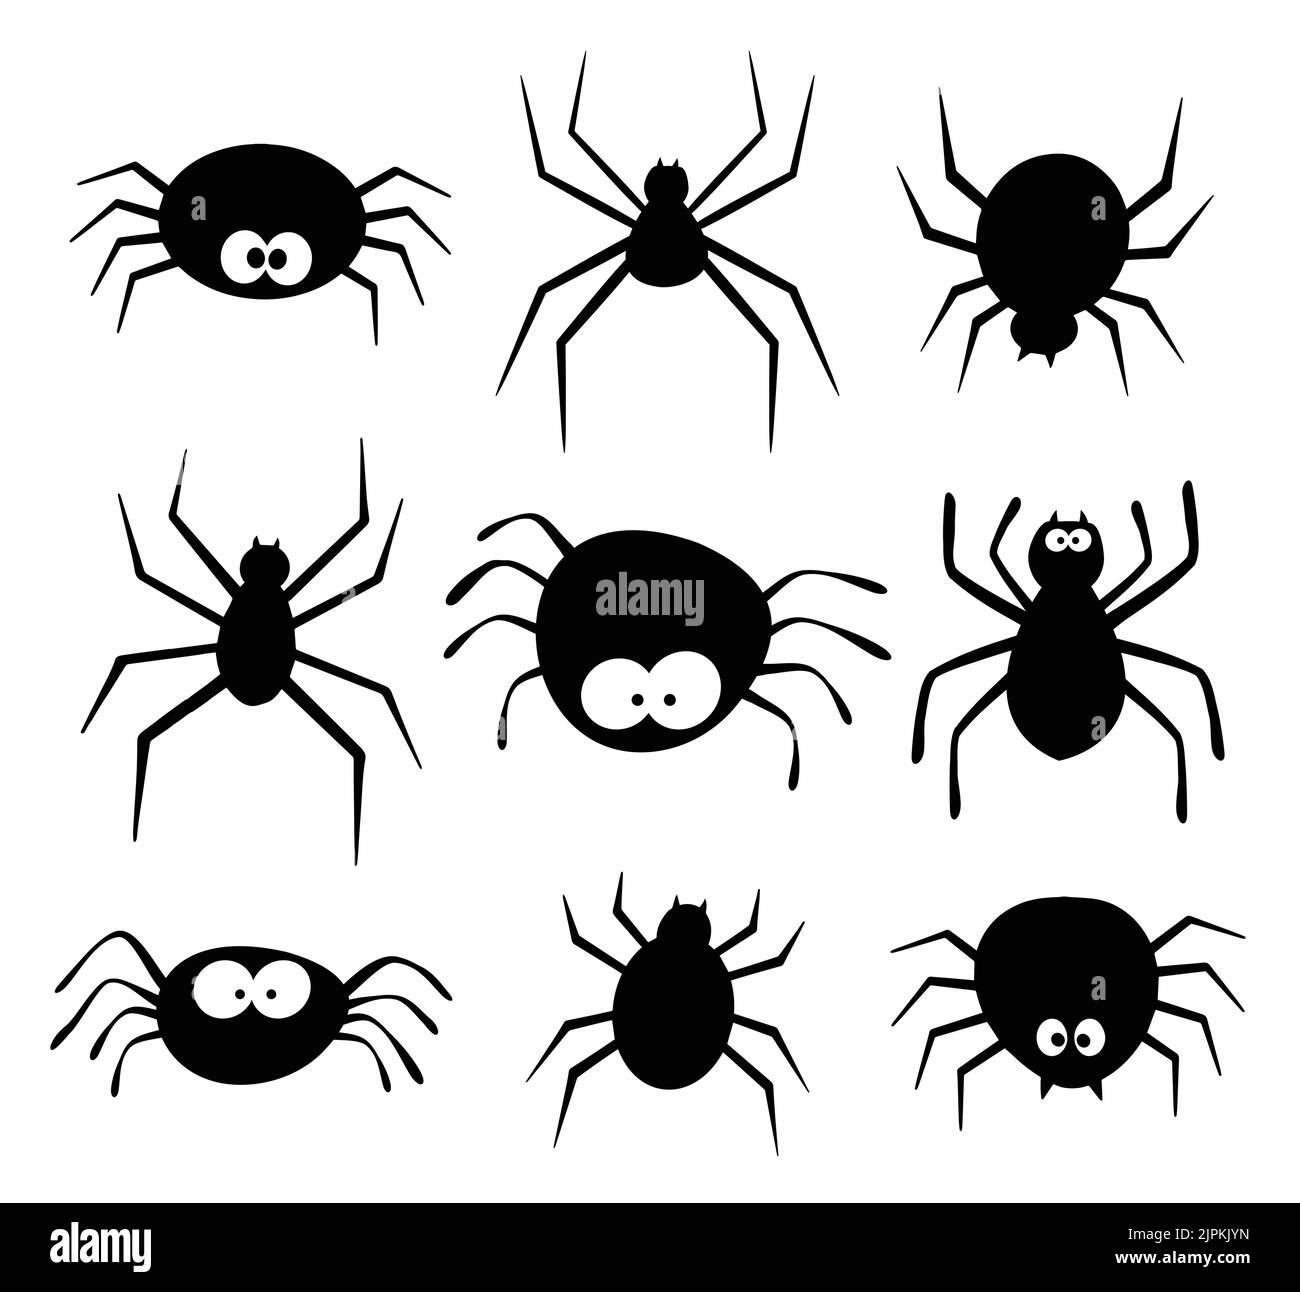 spider of halloween isolated on white background. Scary spiderweb hand drawn silhouette. Stock Vector